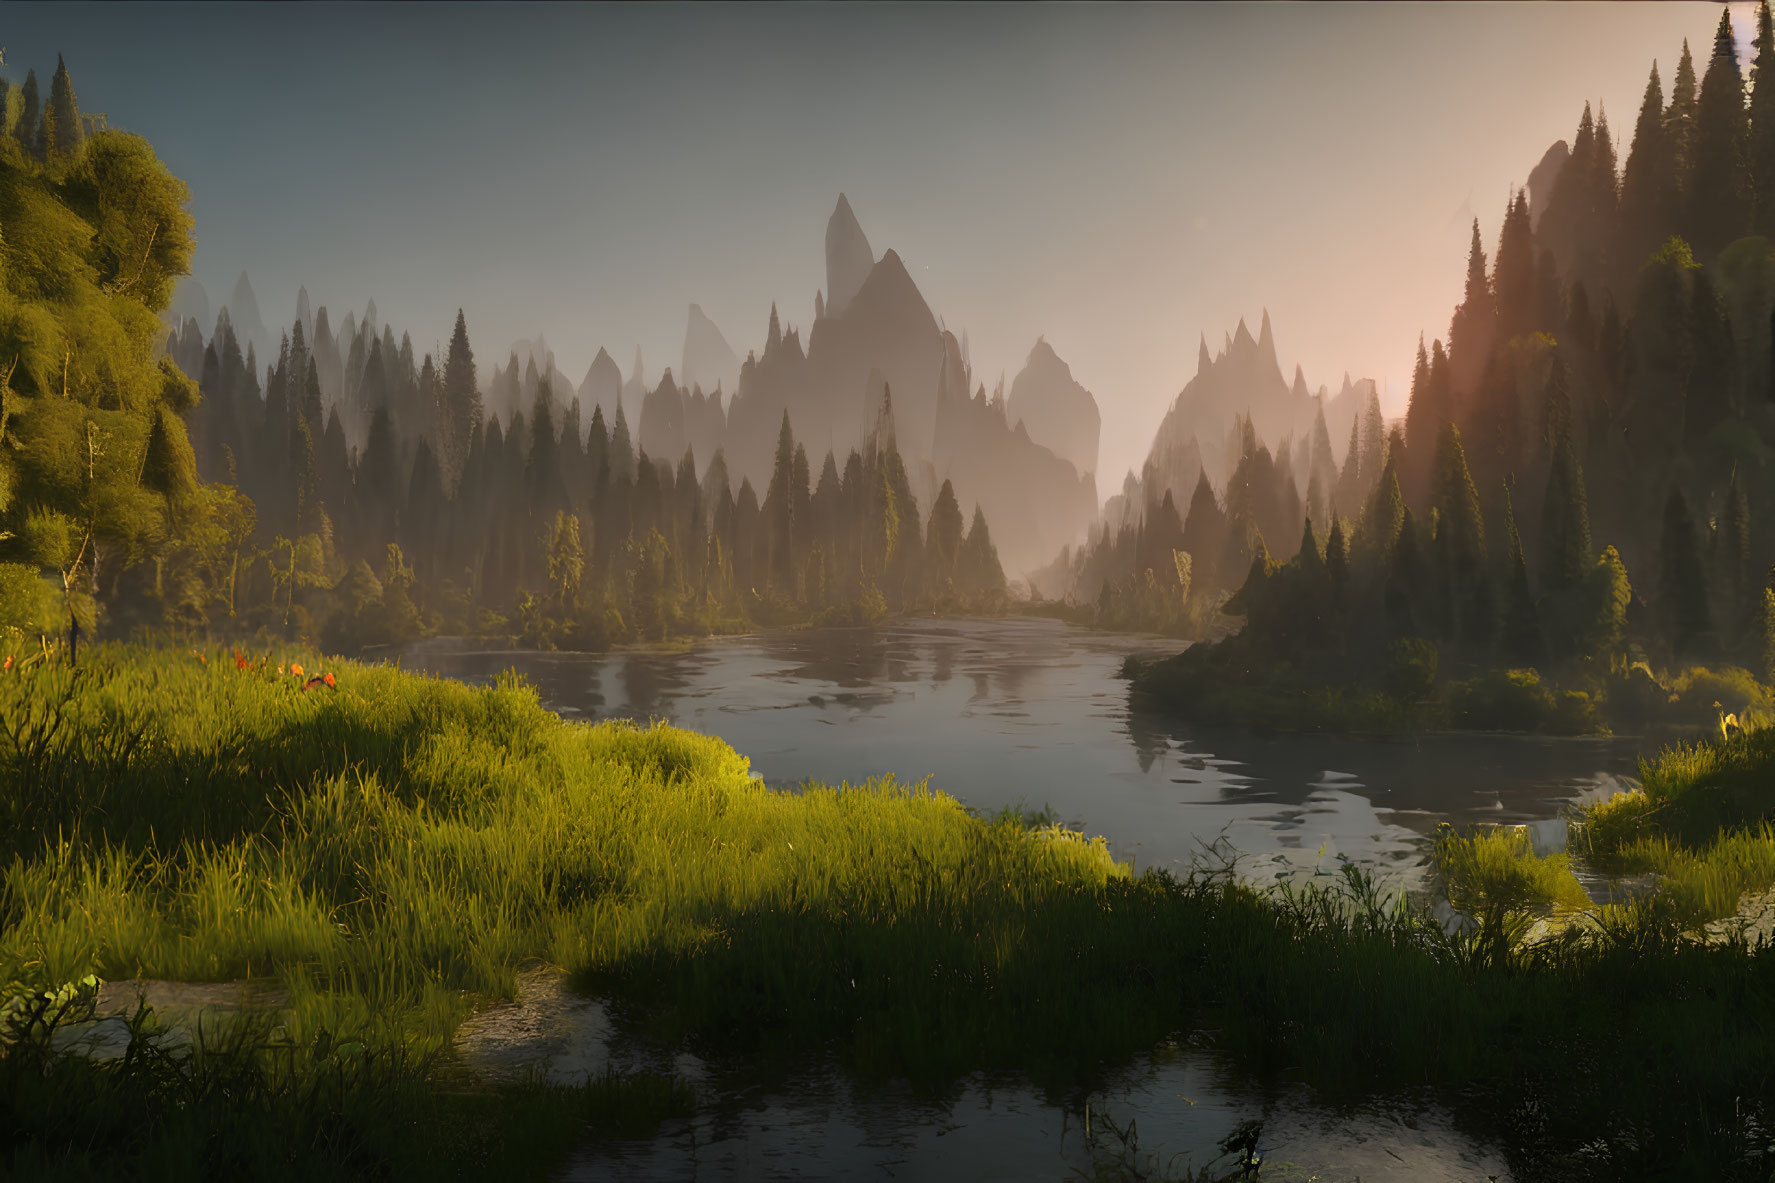 Tranquil River Landscape with Forests and Mountains at Sunrise